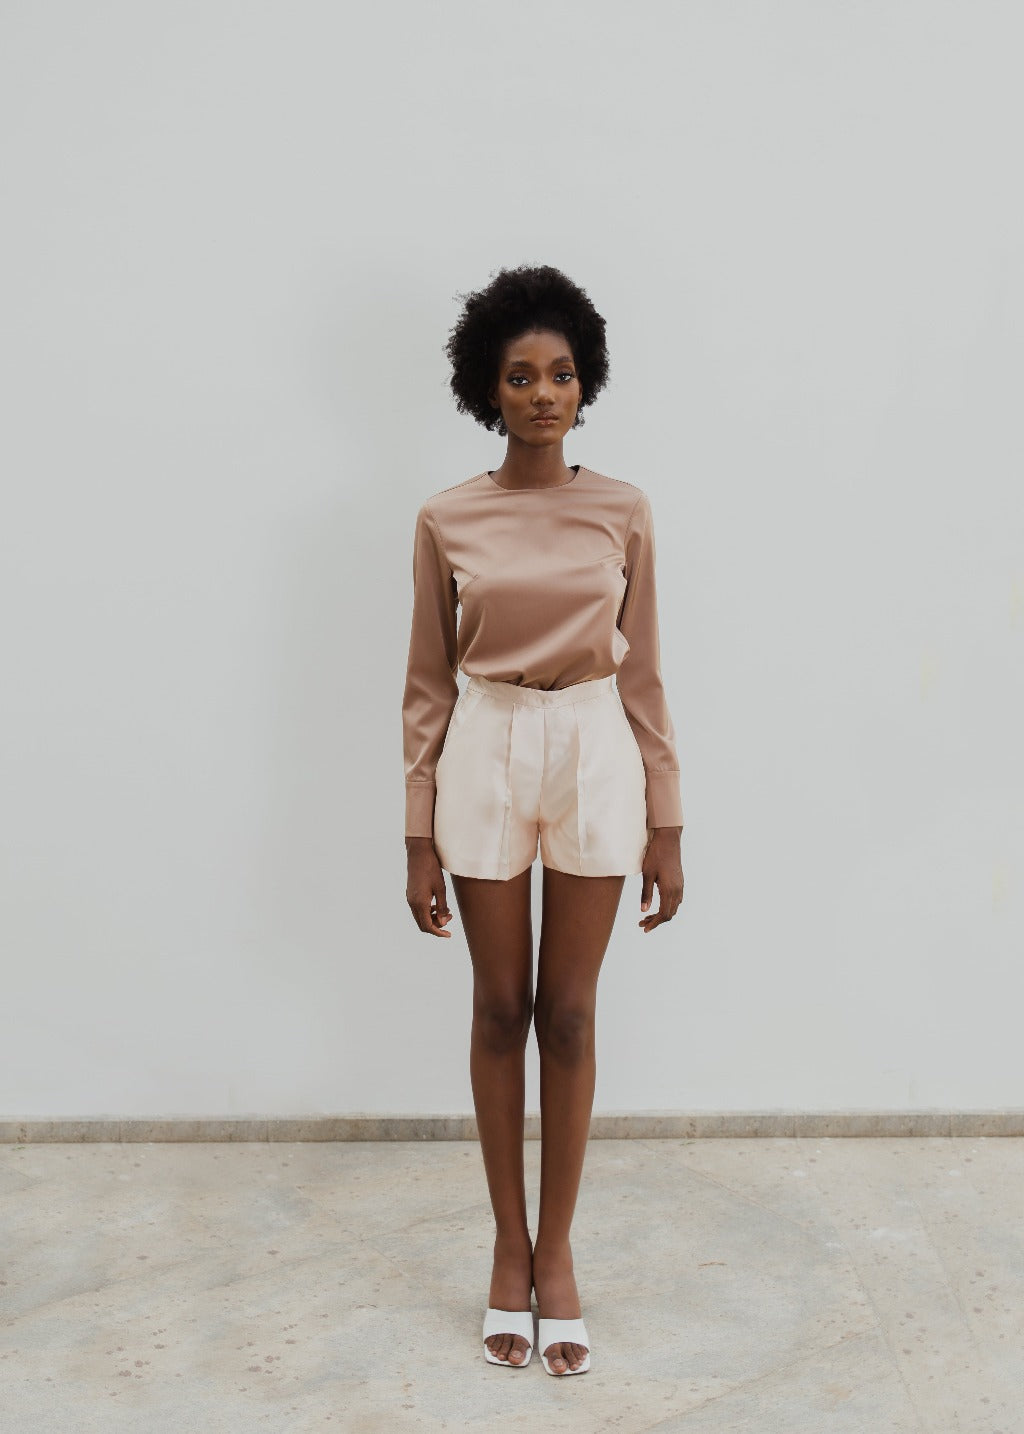 A model wearing a brown top and Nude colored shorts